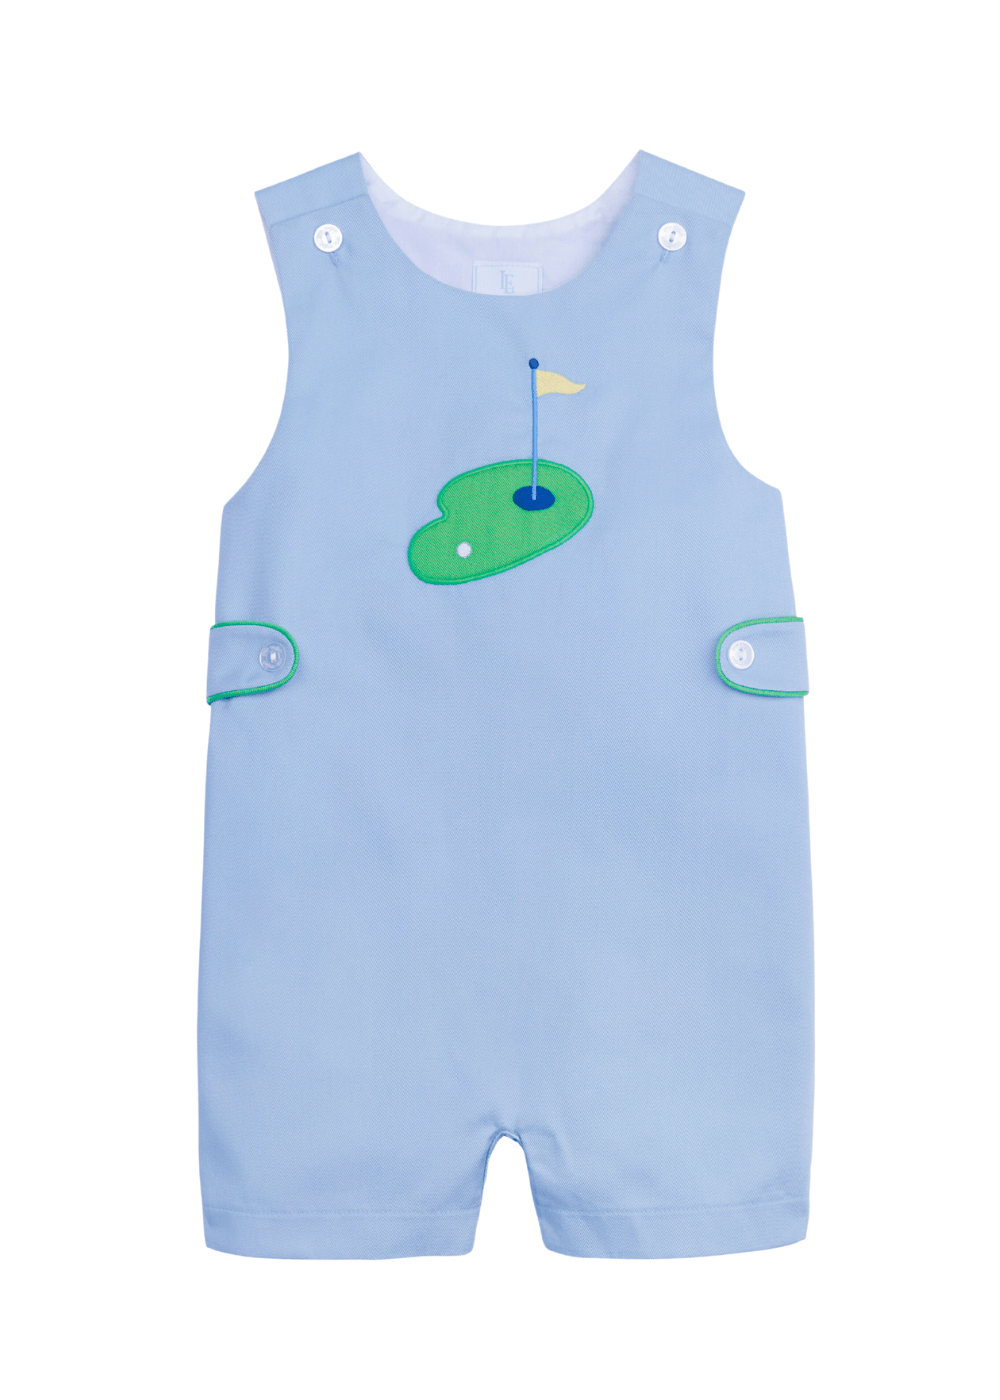 classic childrens clothing boys button tab john john in blue with green golf applique